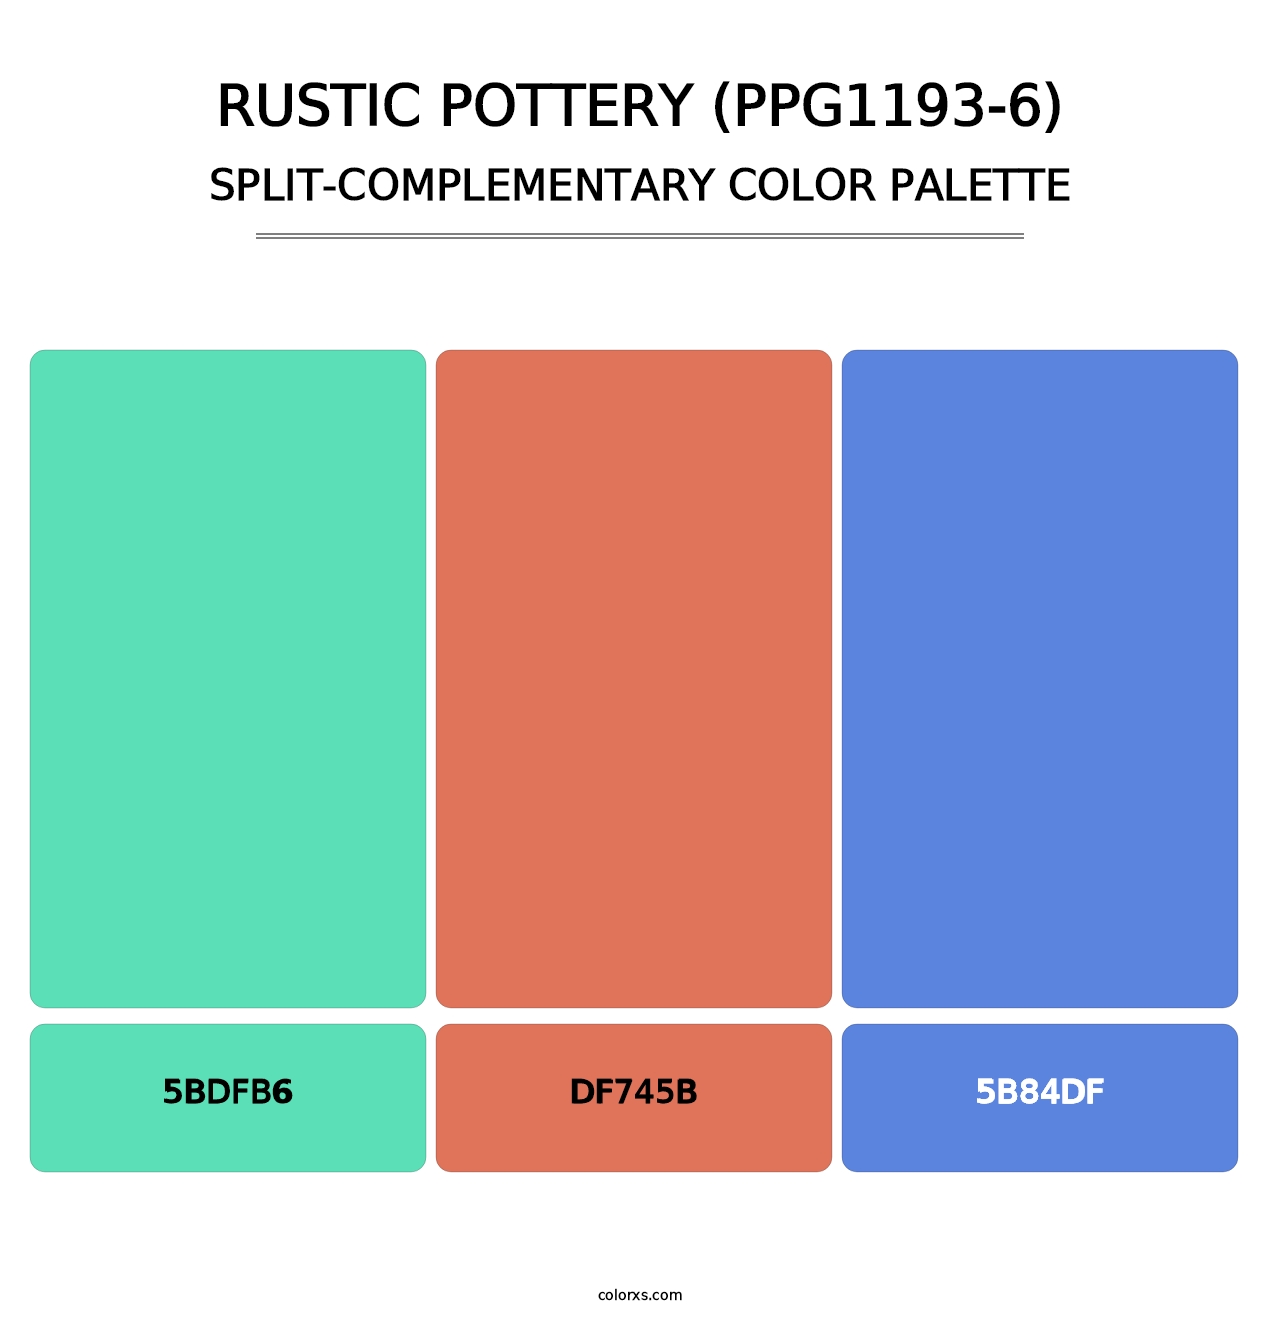 Rustic Pottery (PPG1193-6) - Split-Complementary Color Palette